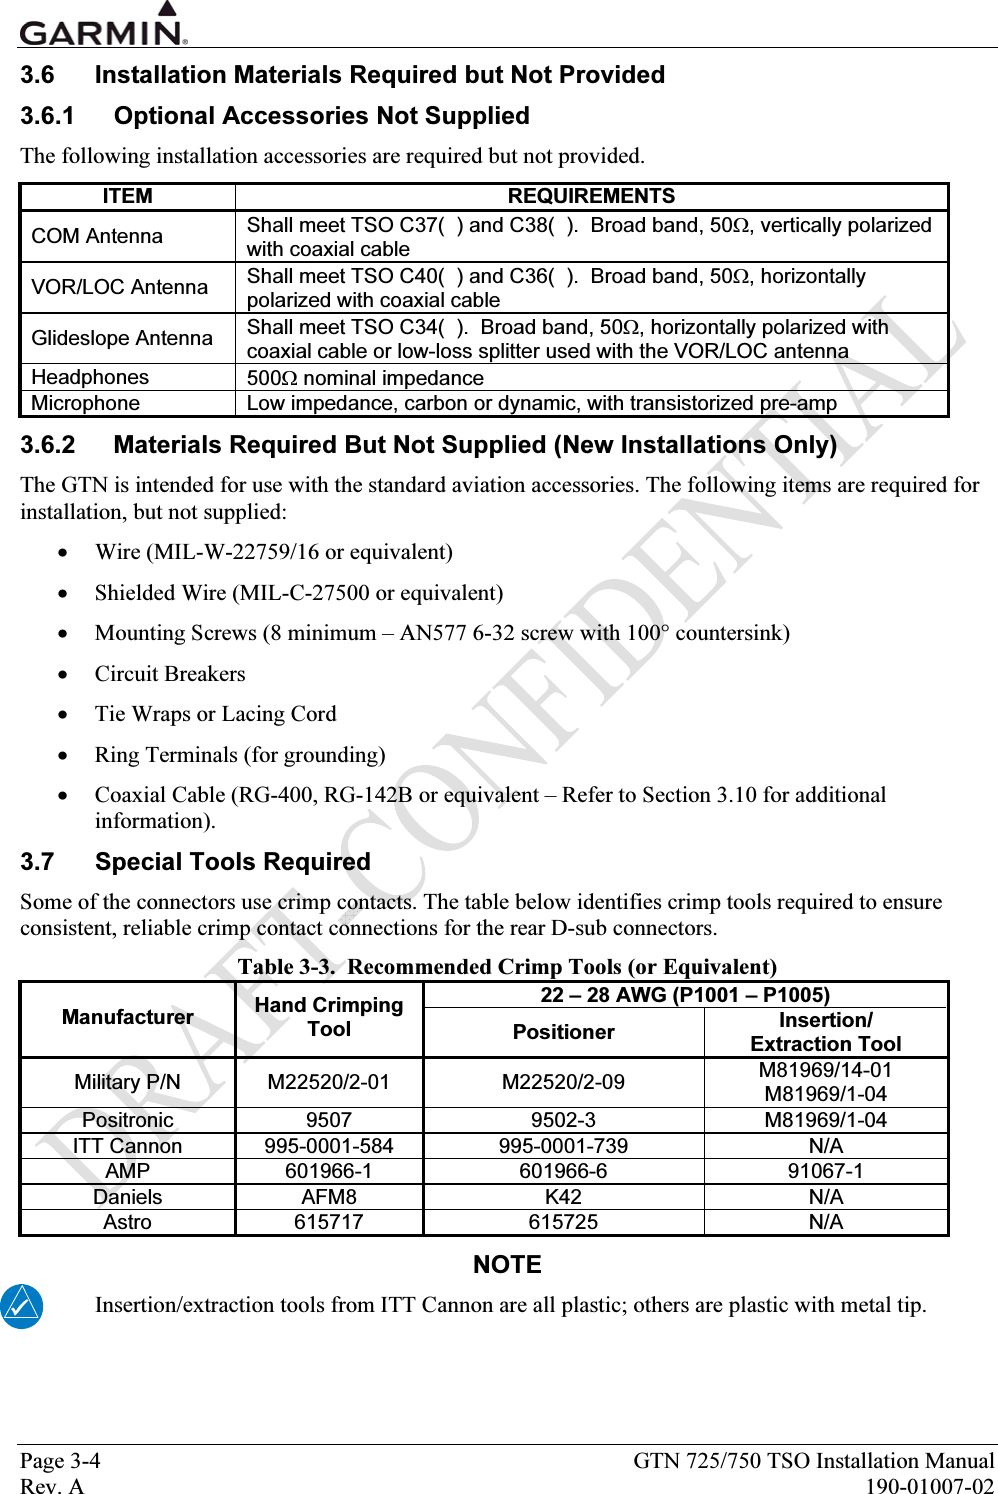  Page 3-4  GTN 725/750 TSO Installation Manual Rev. A  190-01007-02 3.6  Installation Materials Required but Not Provided 3.6.1  Optional Accessories Not Supplied The following installation accessories are required but not provided.   ITEM REQUIREMENTS COM Antenna   Shall meet TSO C37(  ) and C38(  ).  Broad band, 50Ω, vertically polarized with coaxial cable VOR/LOC Antenna  Shall meet TSO C40(  ) and C36(  ).  Broad band, 50Ω, horizontally polarized with coaxial cable Glideslope Antenna  Shall meet TSO C34(  ).  Broad band, 50Ω, horizontally polarized with coaxial cable or low-loss splitter used with the VOR/LOC antenna Headphones  500Ω nominal impedance Microphone  Low impedance, carbon or dynamic, with transistorized pre-amp 3.6.2  Materials Required But Not Supplied (New Installations Only) The GTN is intended for use with the standard aviation accessories. The following items are required for installation, but not supplied: • Wire (MIL-W-22759/16 or equivalent) • Shielded Wire (MIL-C-27500 or equivalent) • Mounting Screws (8 minimum – AN577 6-32 screw with 100° countersink) • Circuit Breakers • Tie Wraps or Lacing Cord • Ring Terminals (for grounding) • Coaxial Cable (RG-400, RG-142B or equivalent – Refer to Section 3.10 for additional information). 3.7  Special Tools Required Some of the connectors use crimp contacts. The table below identifies crimp tools required to ensure consistent, reliable crimp contact connections for the rear D-sub connectors. Table 3-3.  Recommended Crimp Tools (or Equivalent) 22 – 28 AWG (P1001 – P1005) Manufacturer  Hand Crimping Tool  Positioner  Insertion/ Extraction Tool Military P/N  M22520/2-01  M22520/2-09  M81969/14-01 M81969/1-04 Positronic 9507  9502-3  M81969/1-04 ITT Cannon  995-0001-584  995-0001-739  N/A AMP 601966-1  601966-6  91067-1 Daniels AFM8  K42  N/A Astro 615717  615725  N/A NOTE Insertion/extraction tools from ITT Cannon are all plastic; others are plastic with metal tip.   